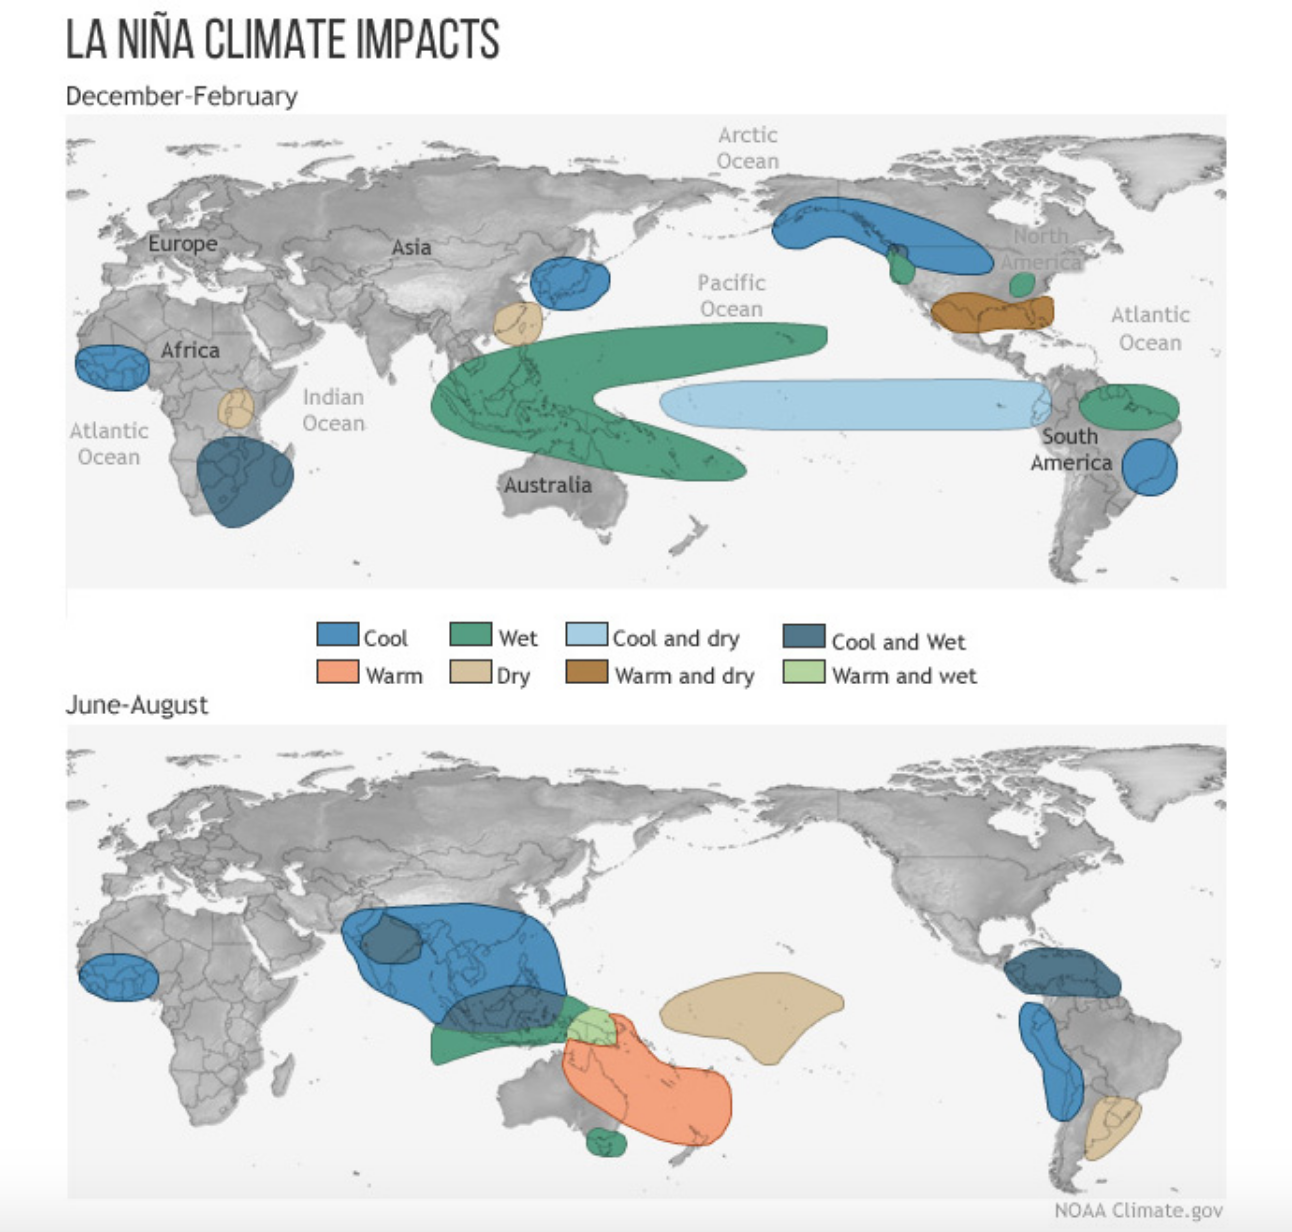 Typical impacts of La Niña on the world during Northern Hemisphere winter and summer. Credit: Climate.gov